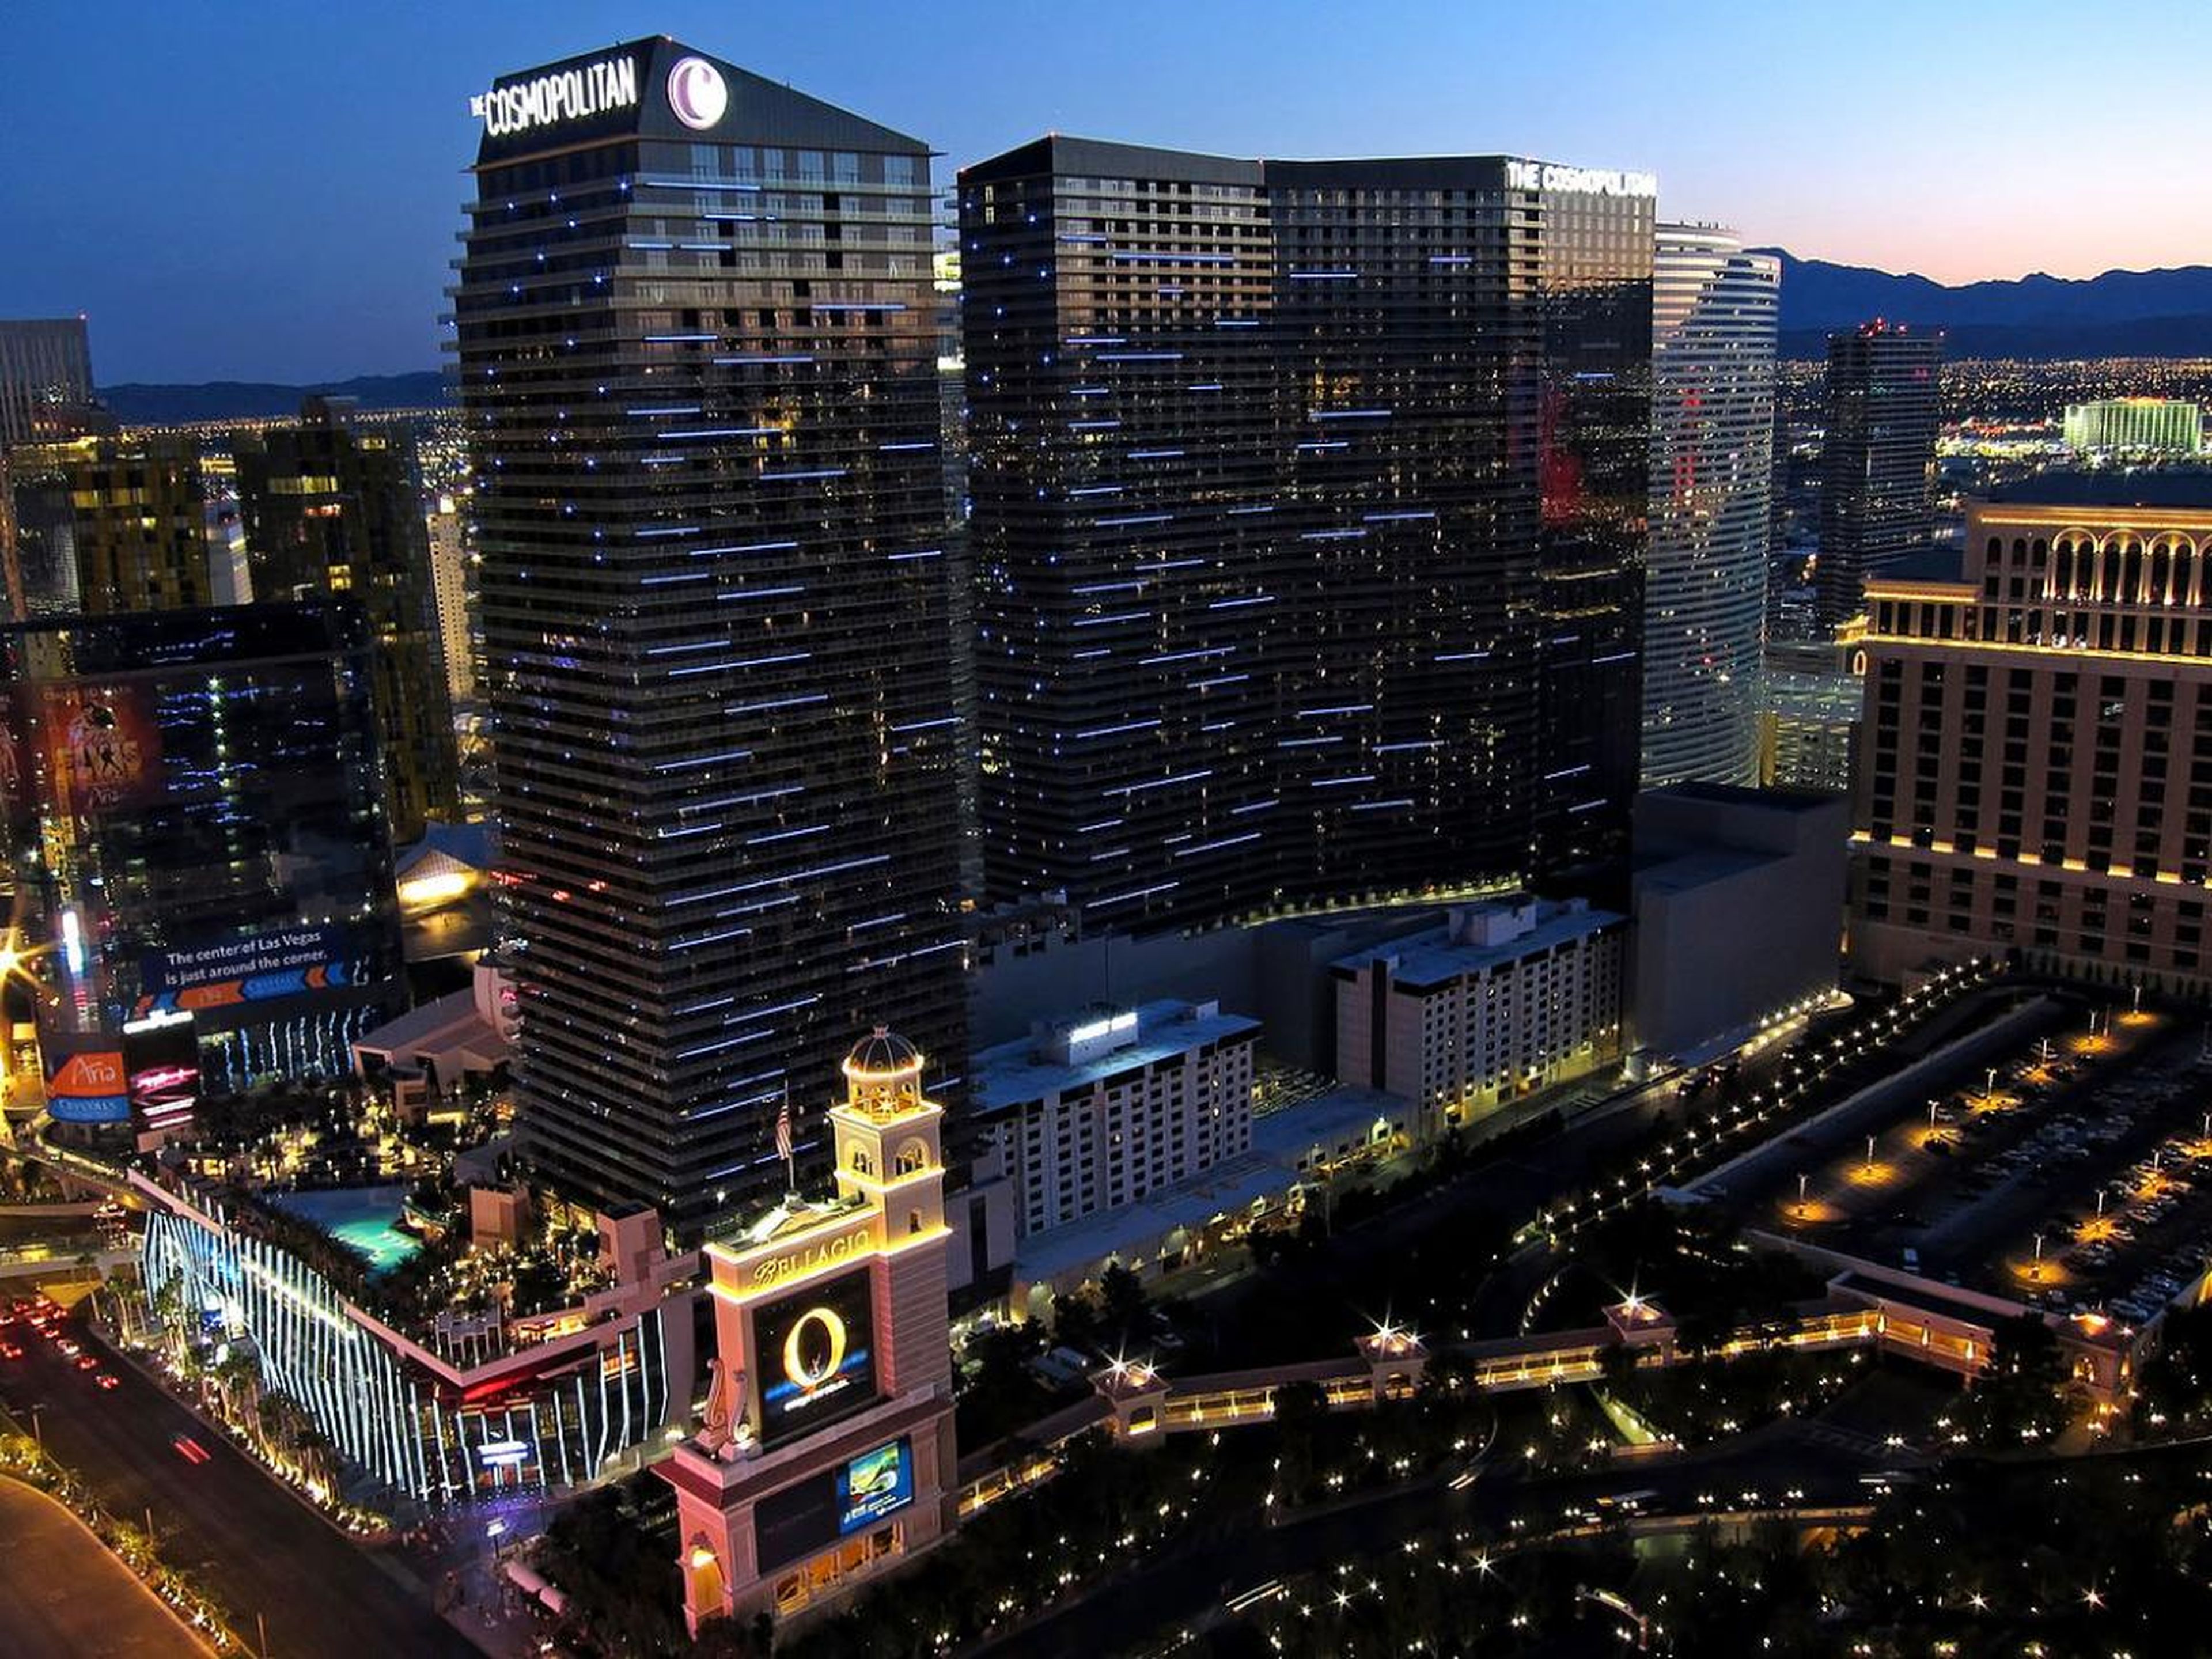 In 2010, a set of Las Vegas high-rises called the Cosmopolitan was built for $3.9 billion.